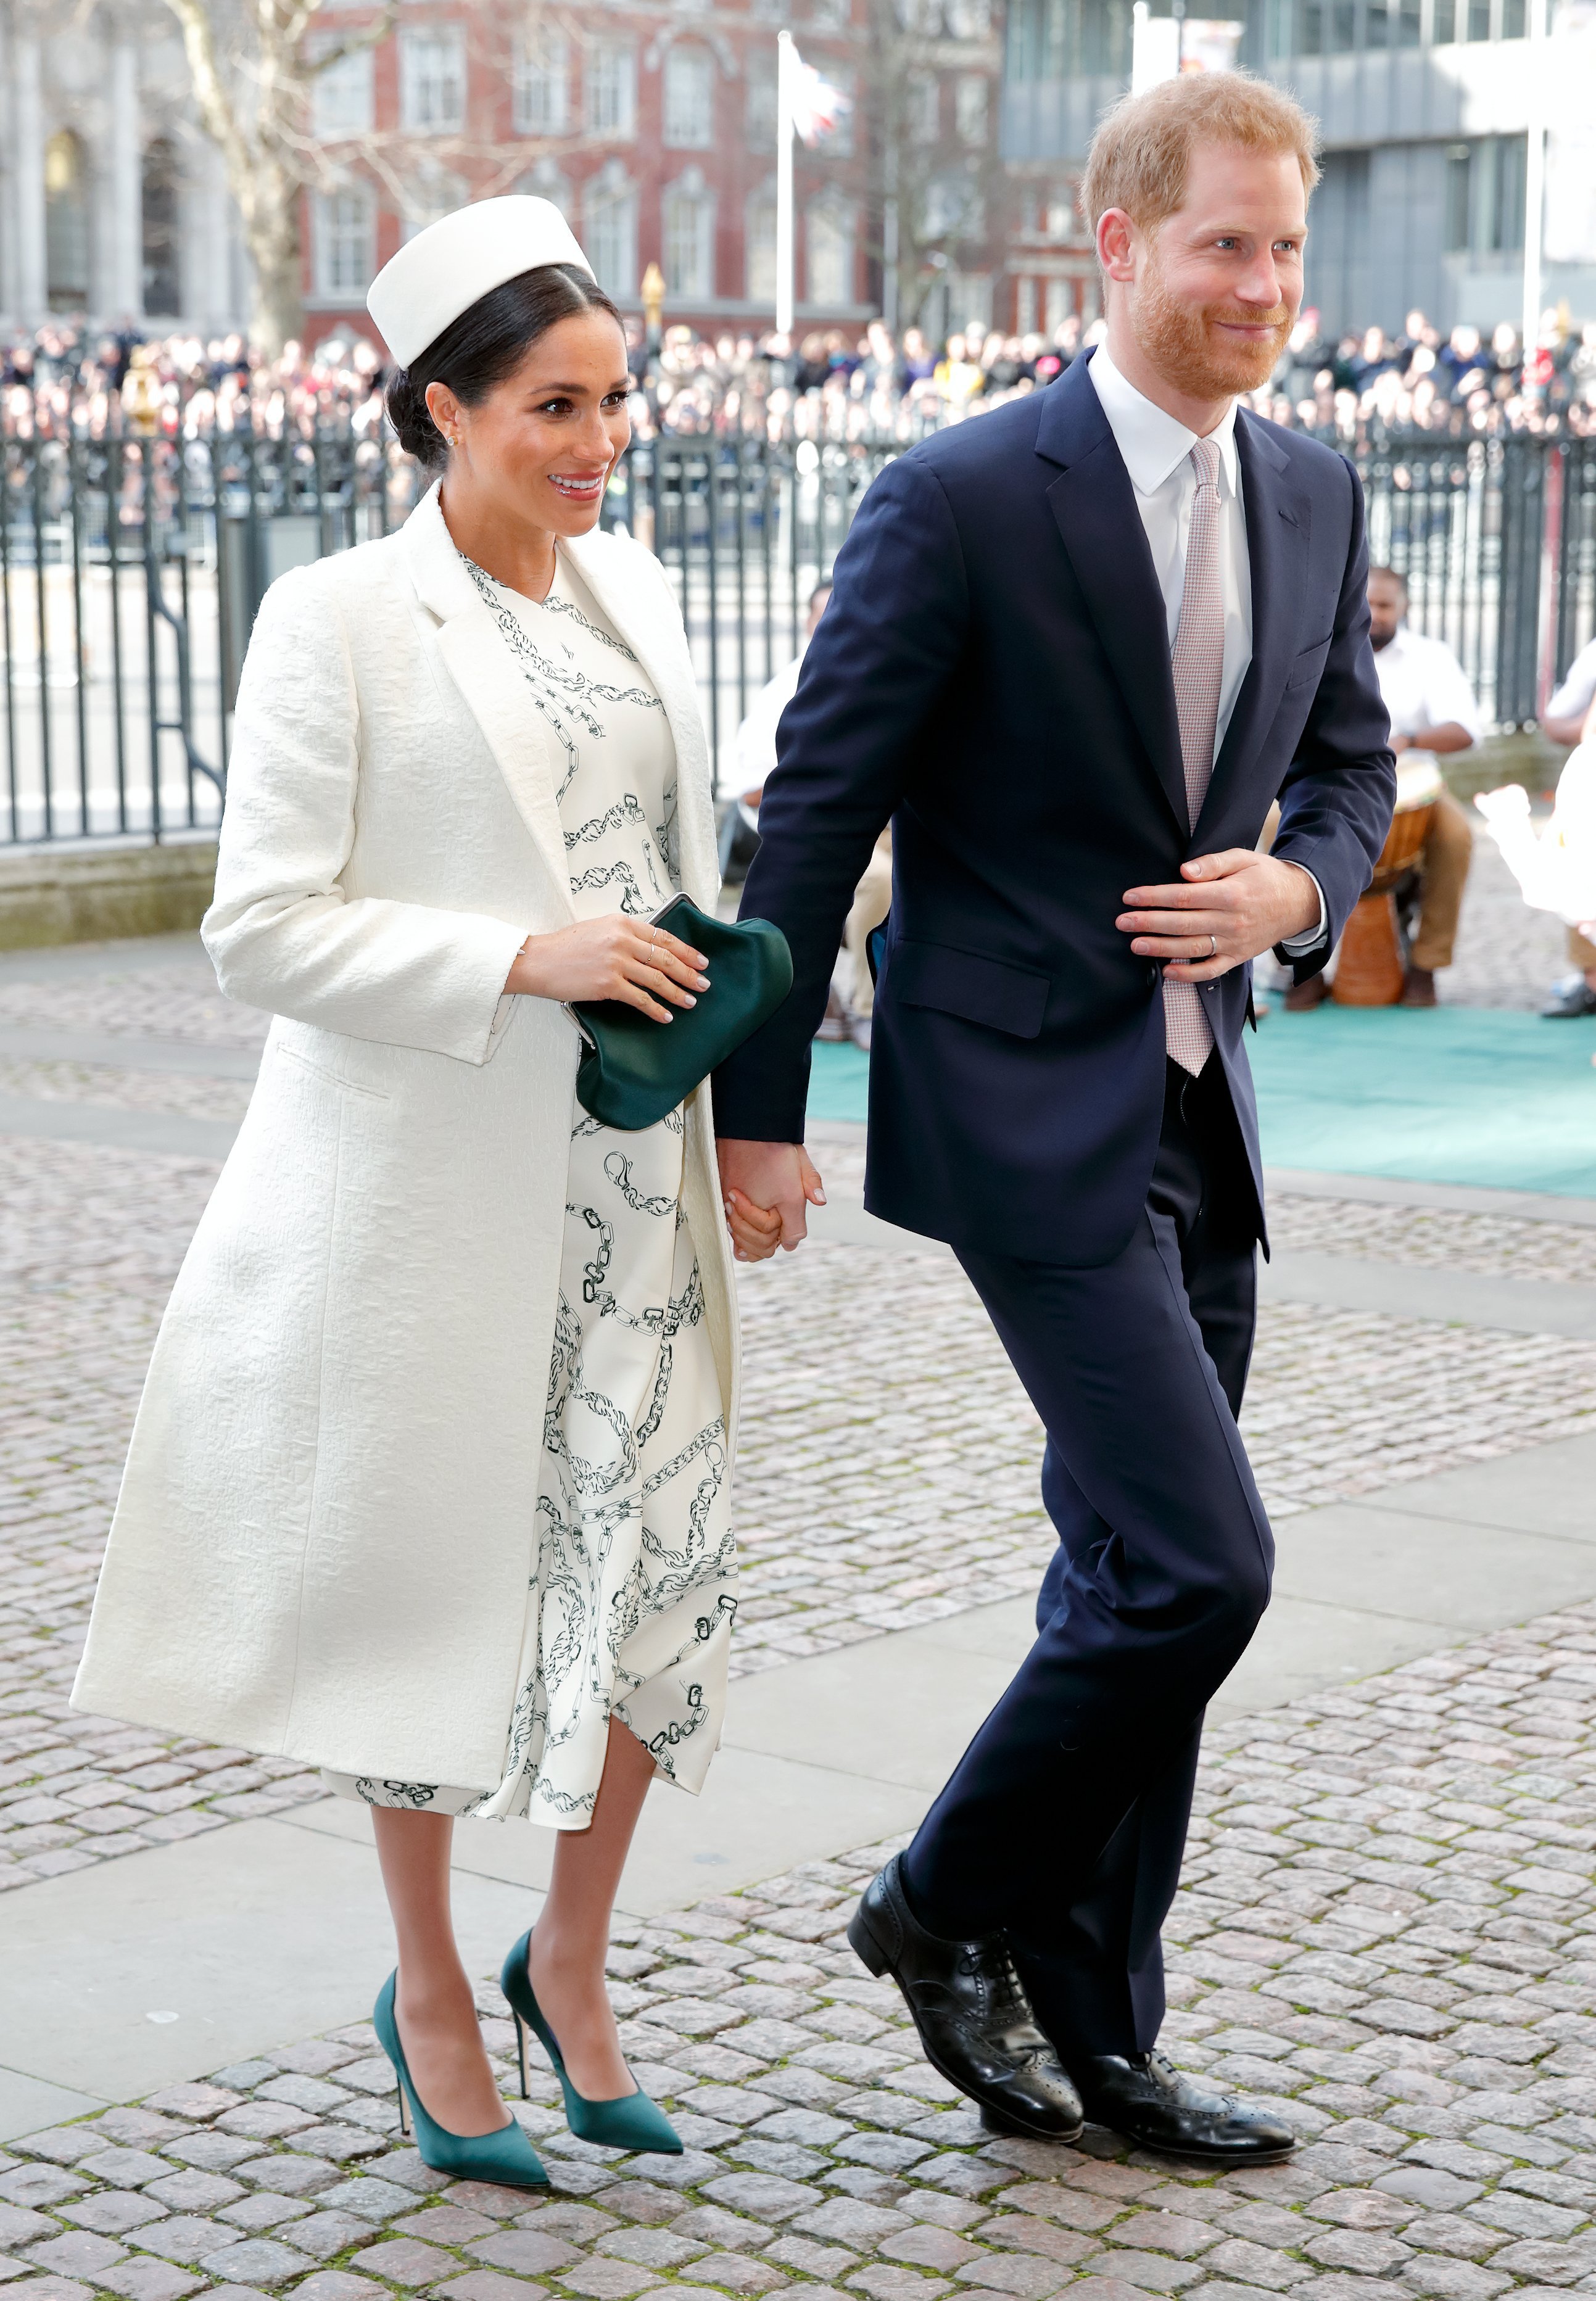 Meghan Markle and Prince Harry on Commonwealth Day in March 2019 | Photo: Getty Images